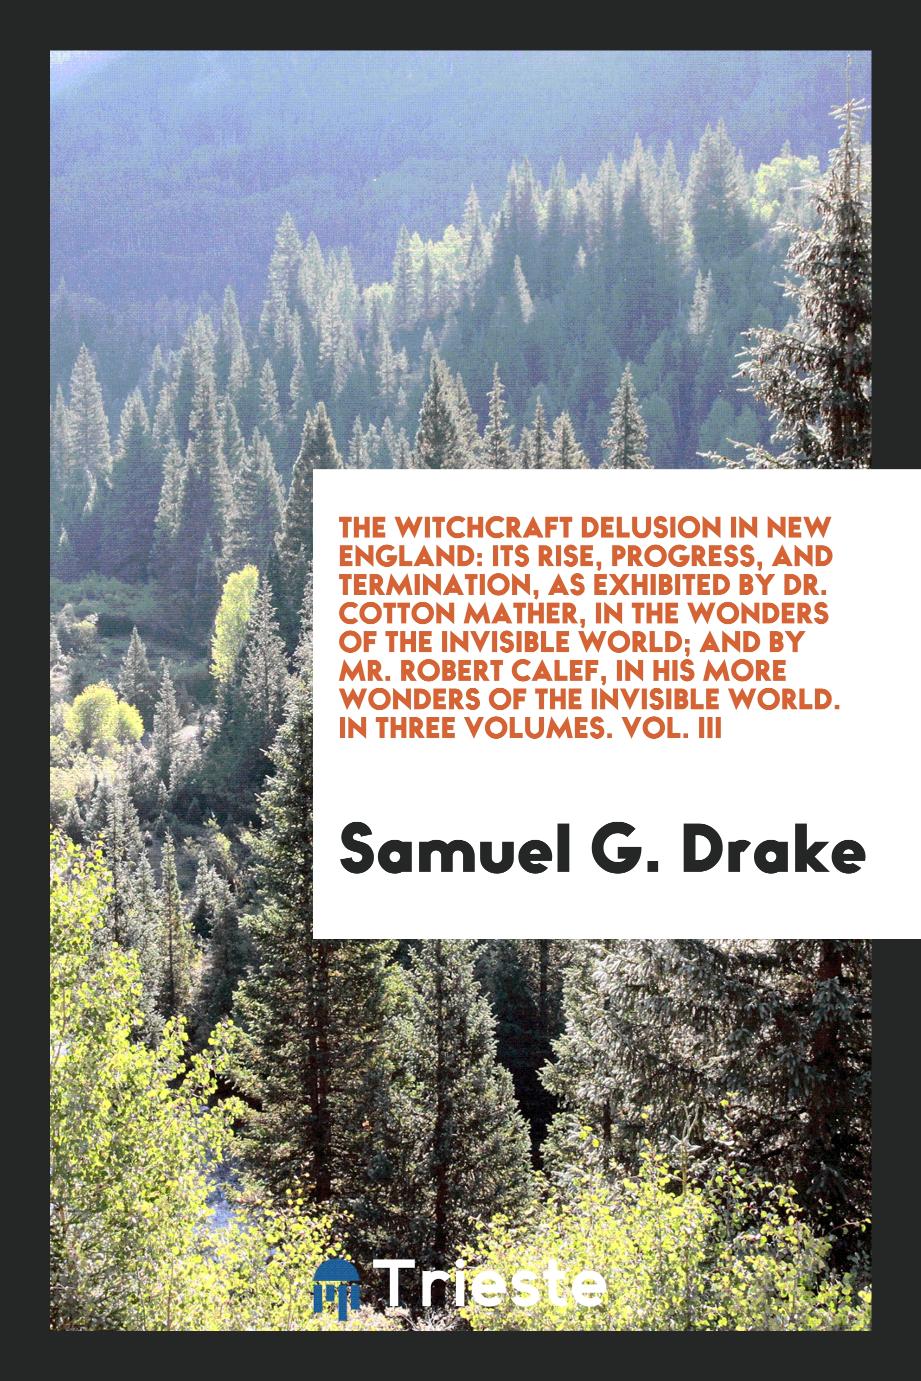 The Witchcraft Delusion in New England: Its Rise, Progress, and Termination, as Exhibited by Dr. Cotton Mather, in the Wonders of the Invisible World; And by Mr. Robert Calef, in His More Wonders of the Invisible World. In Three Volumes. Vol. III